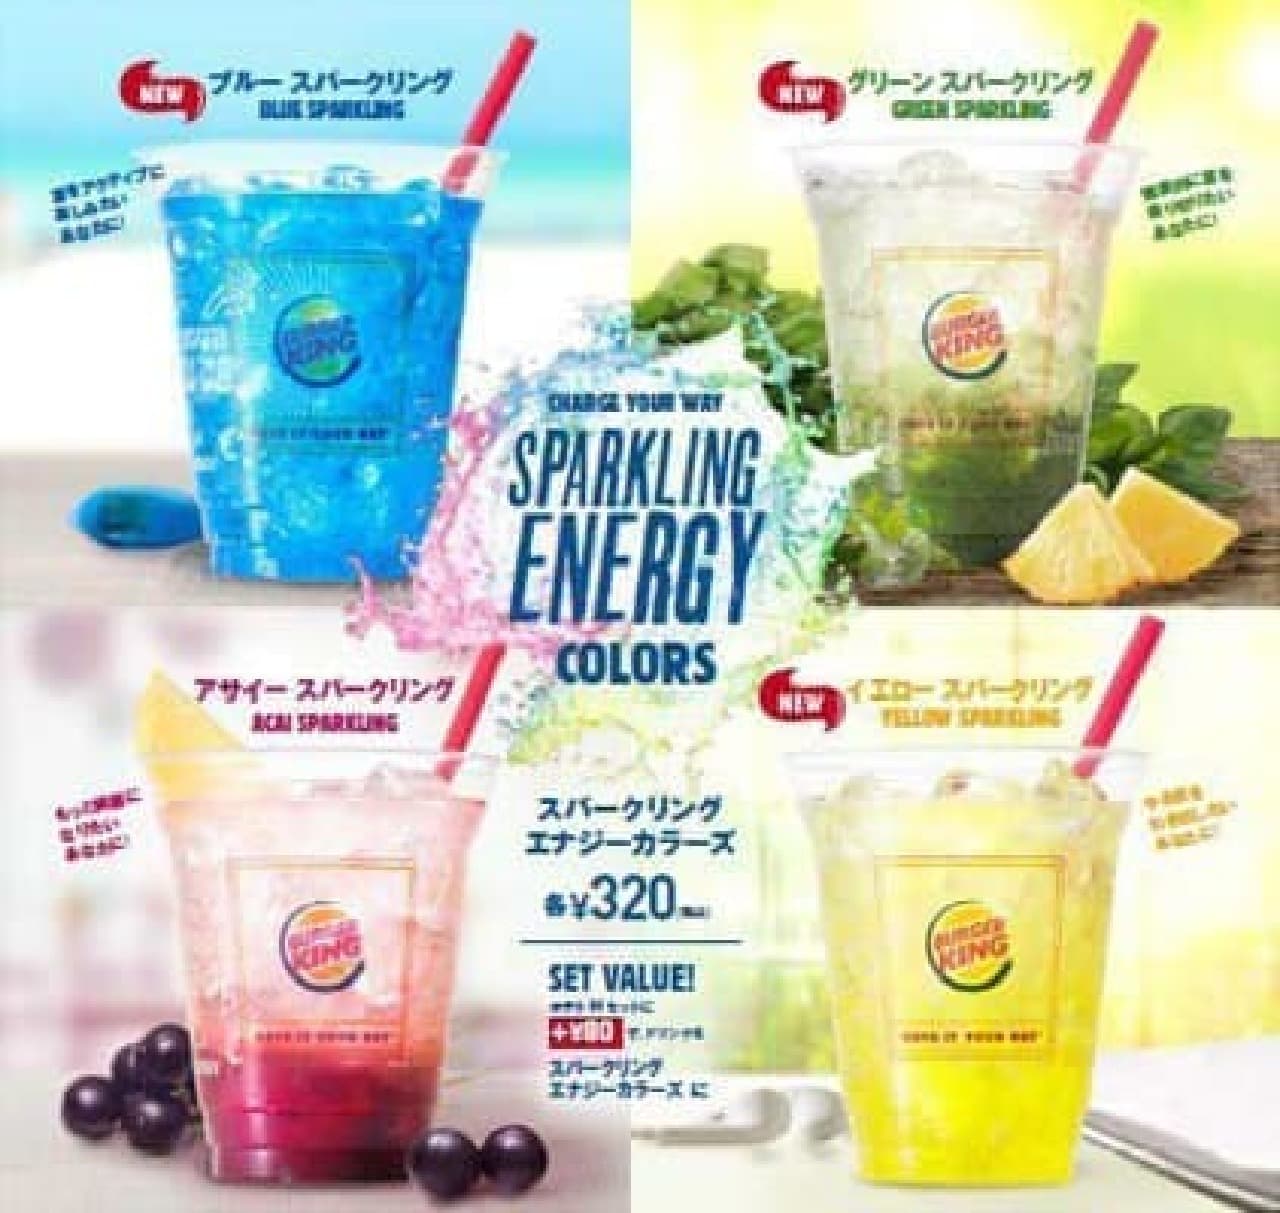 A colorful summer energy drink!